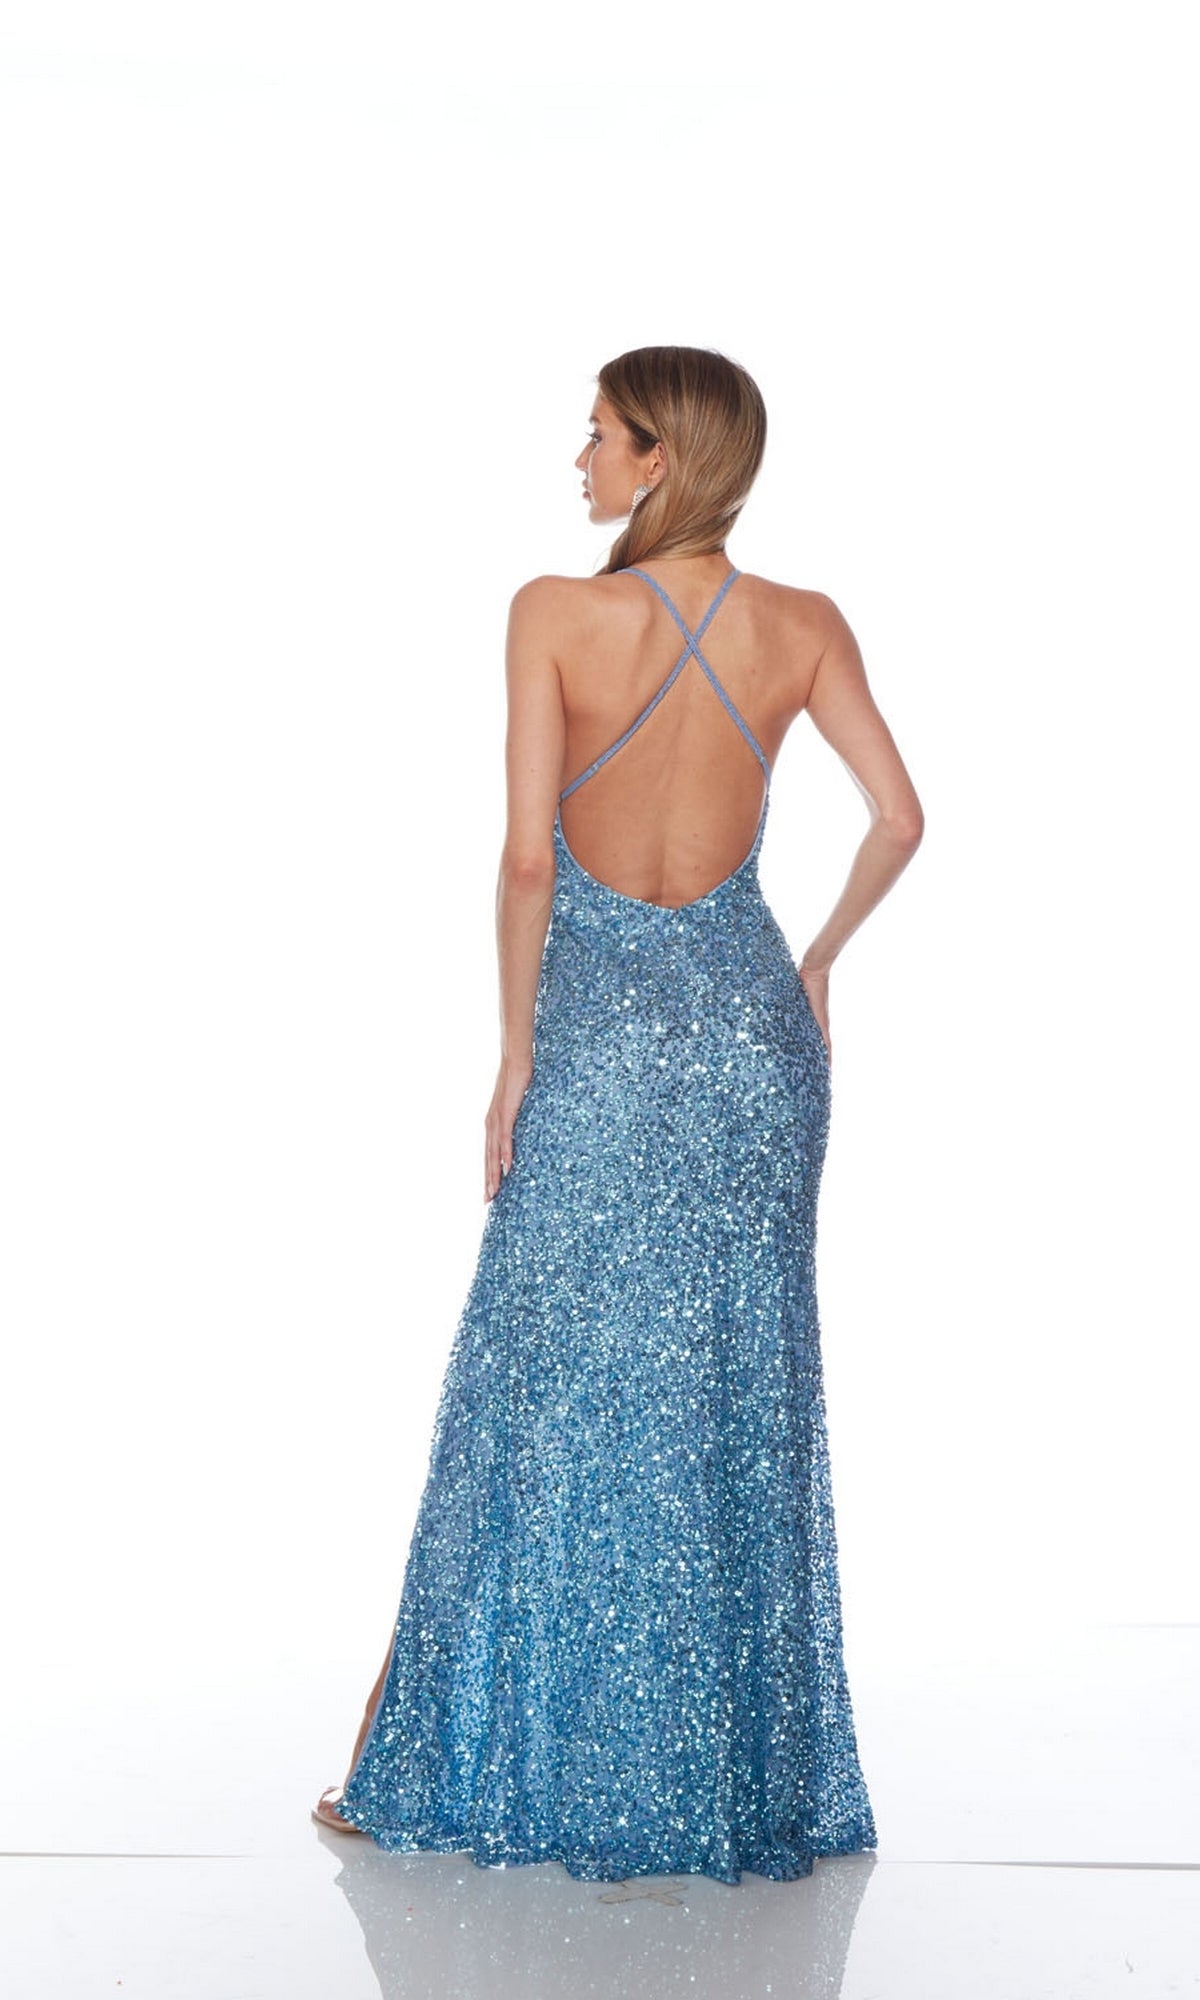 Hand-Beaded Alyce Long Sequin Prom Dress 88001